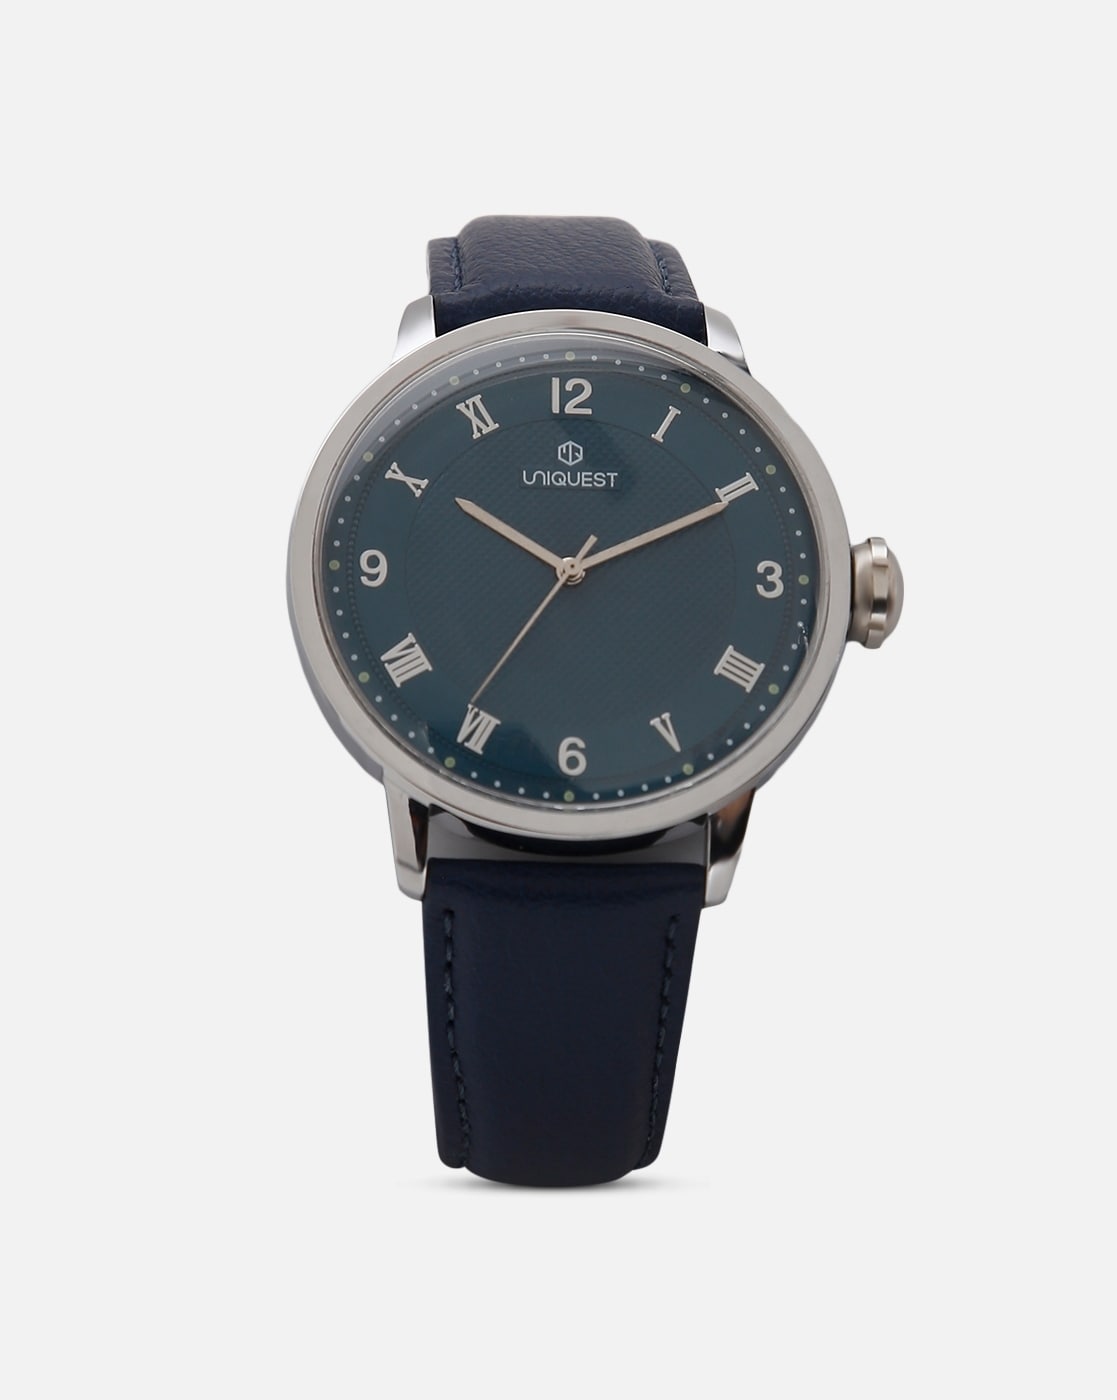 Navy by Name - Navy by Nature - Tudor collector